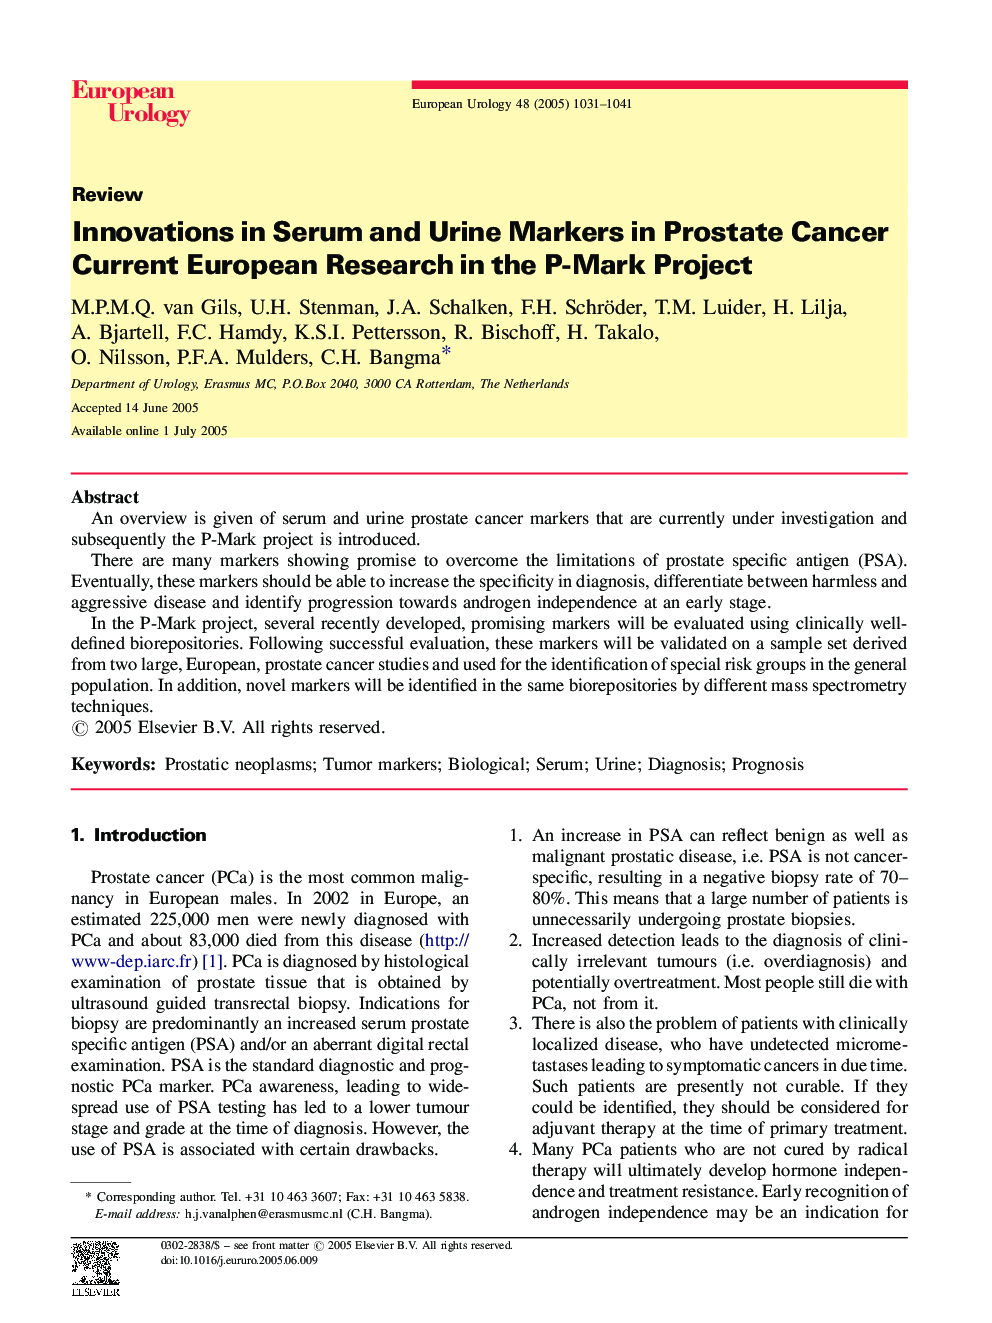 Innovations in Serum and Urine Markers in Prostate Cancer